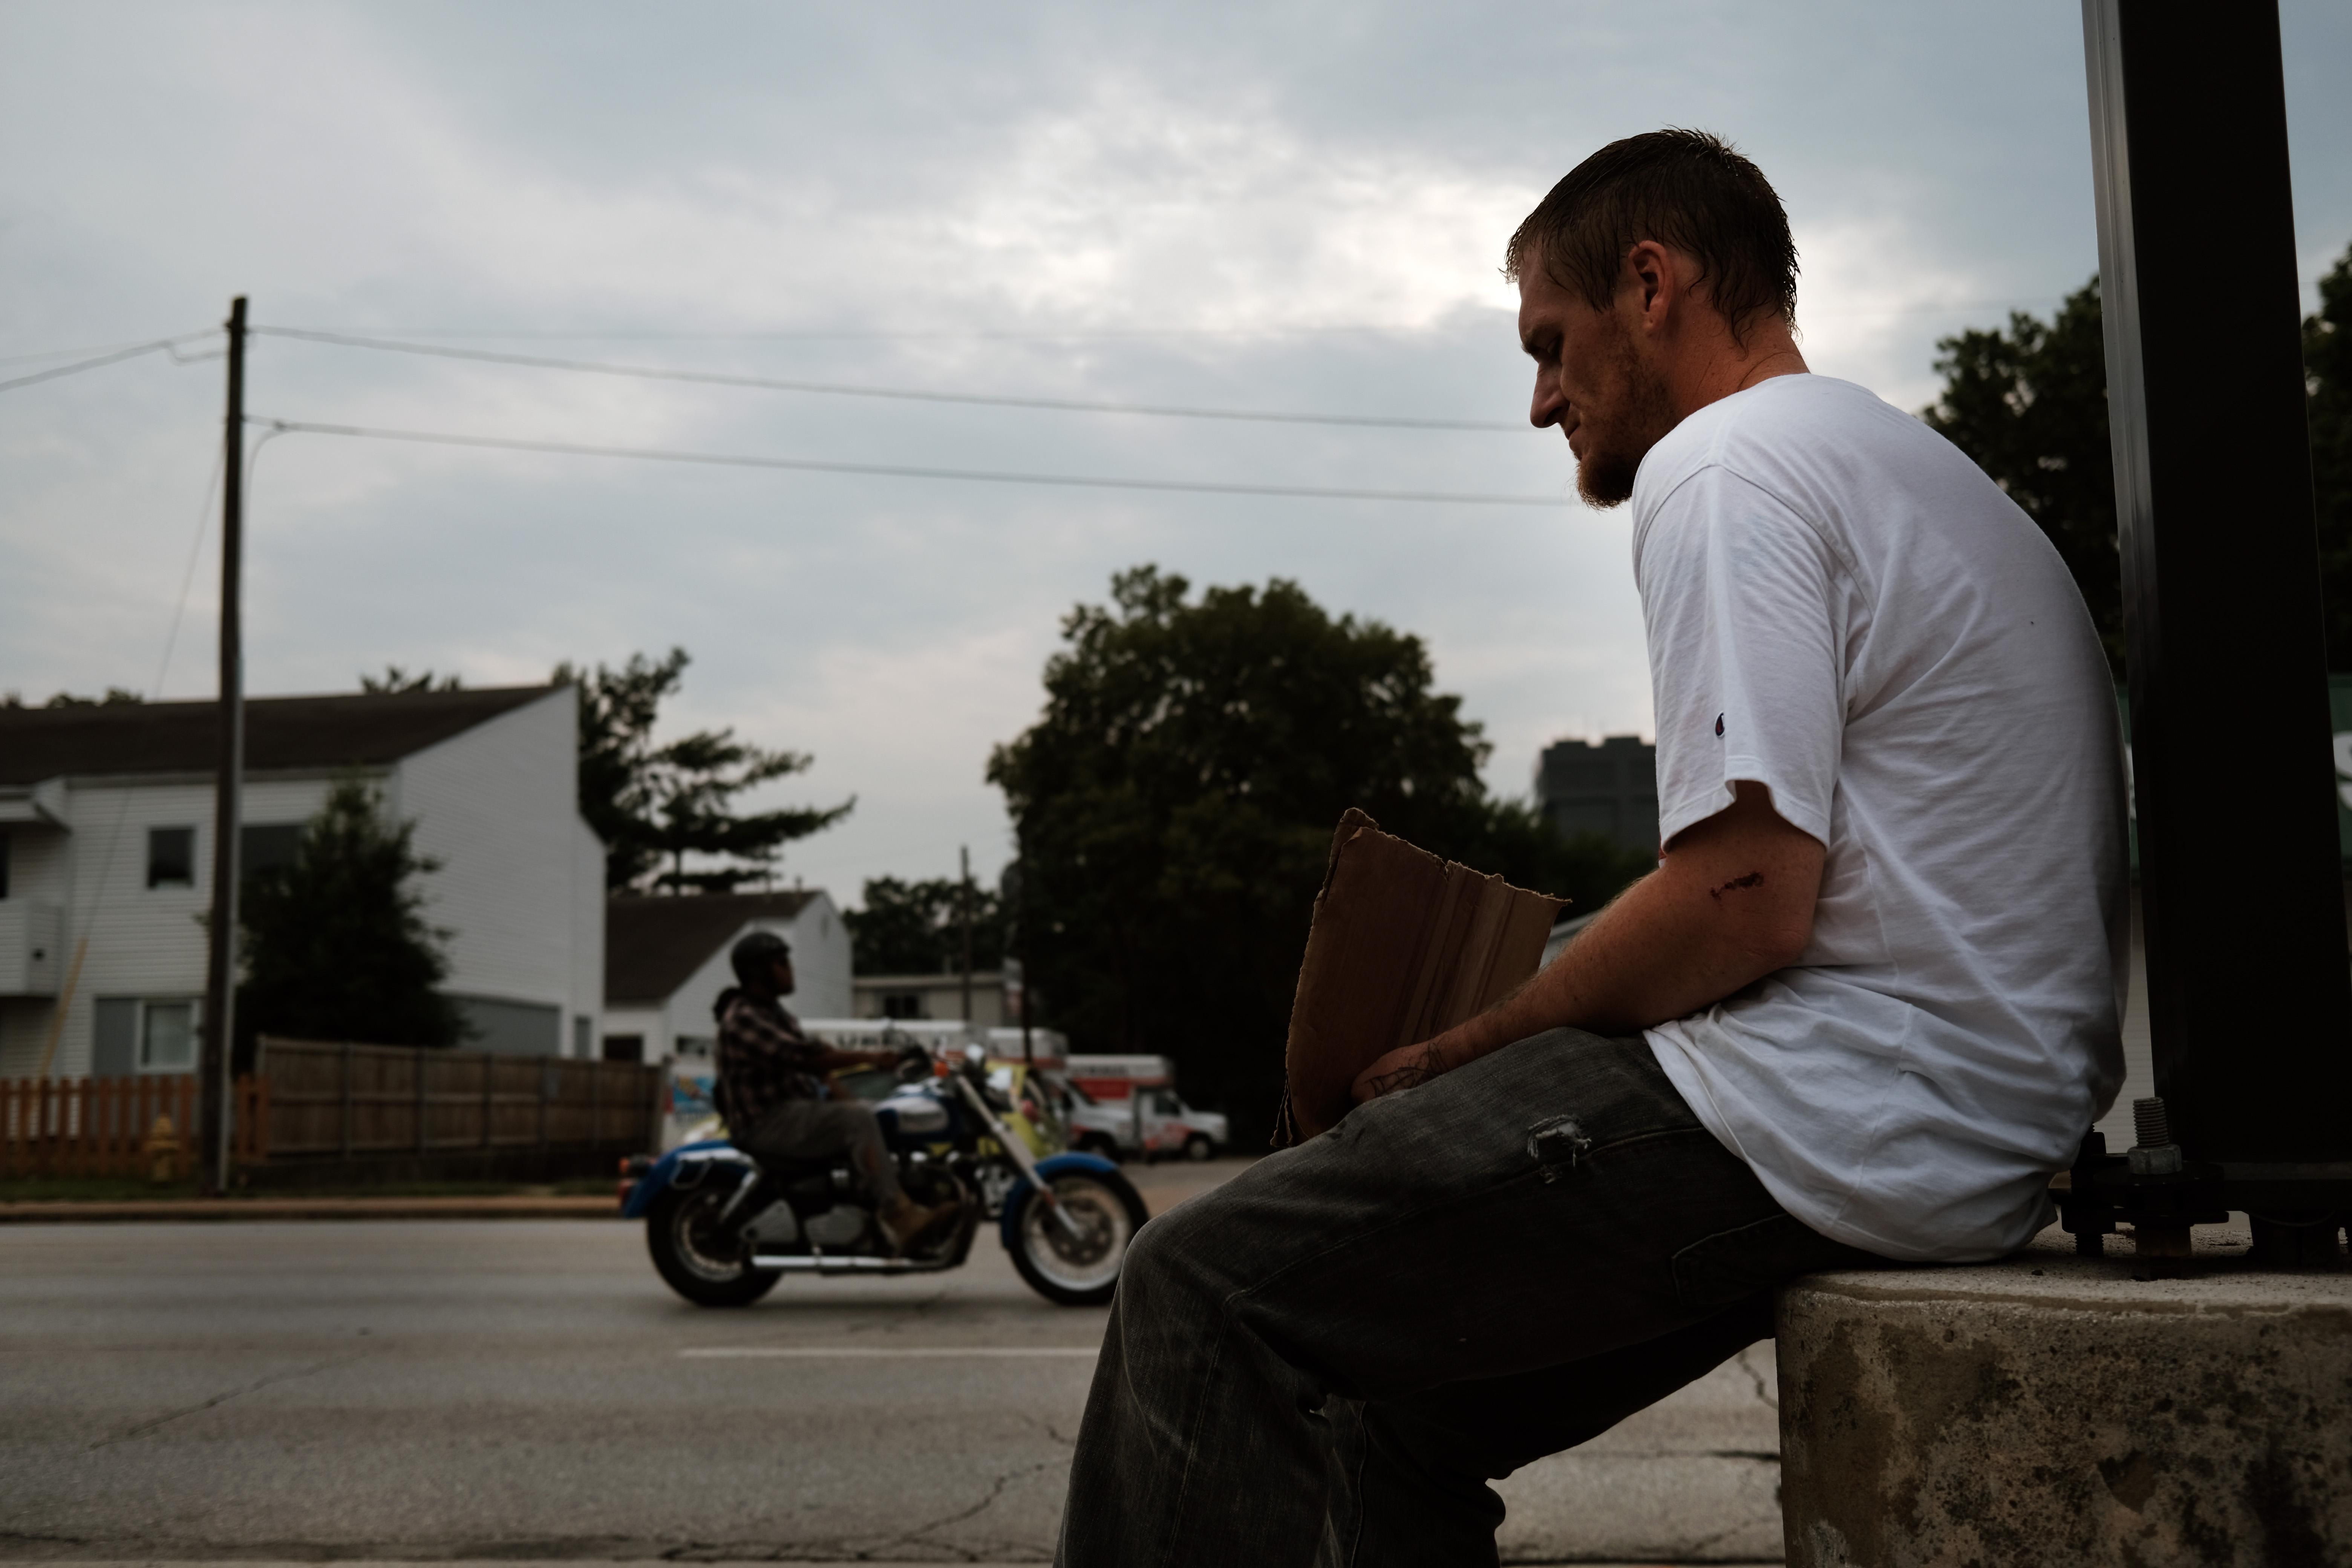 A homeless man named Caleb sits on a street corner on August 5, 2021 in Springfield, Missouri.